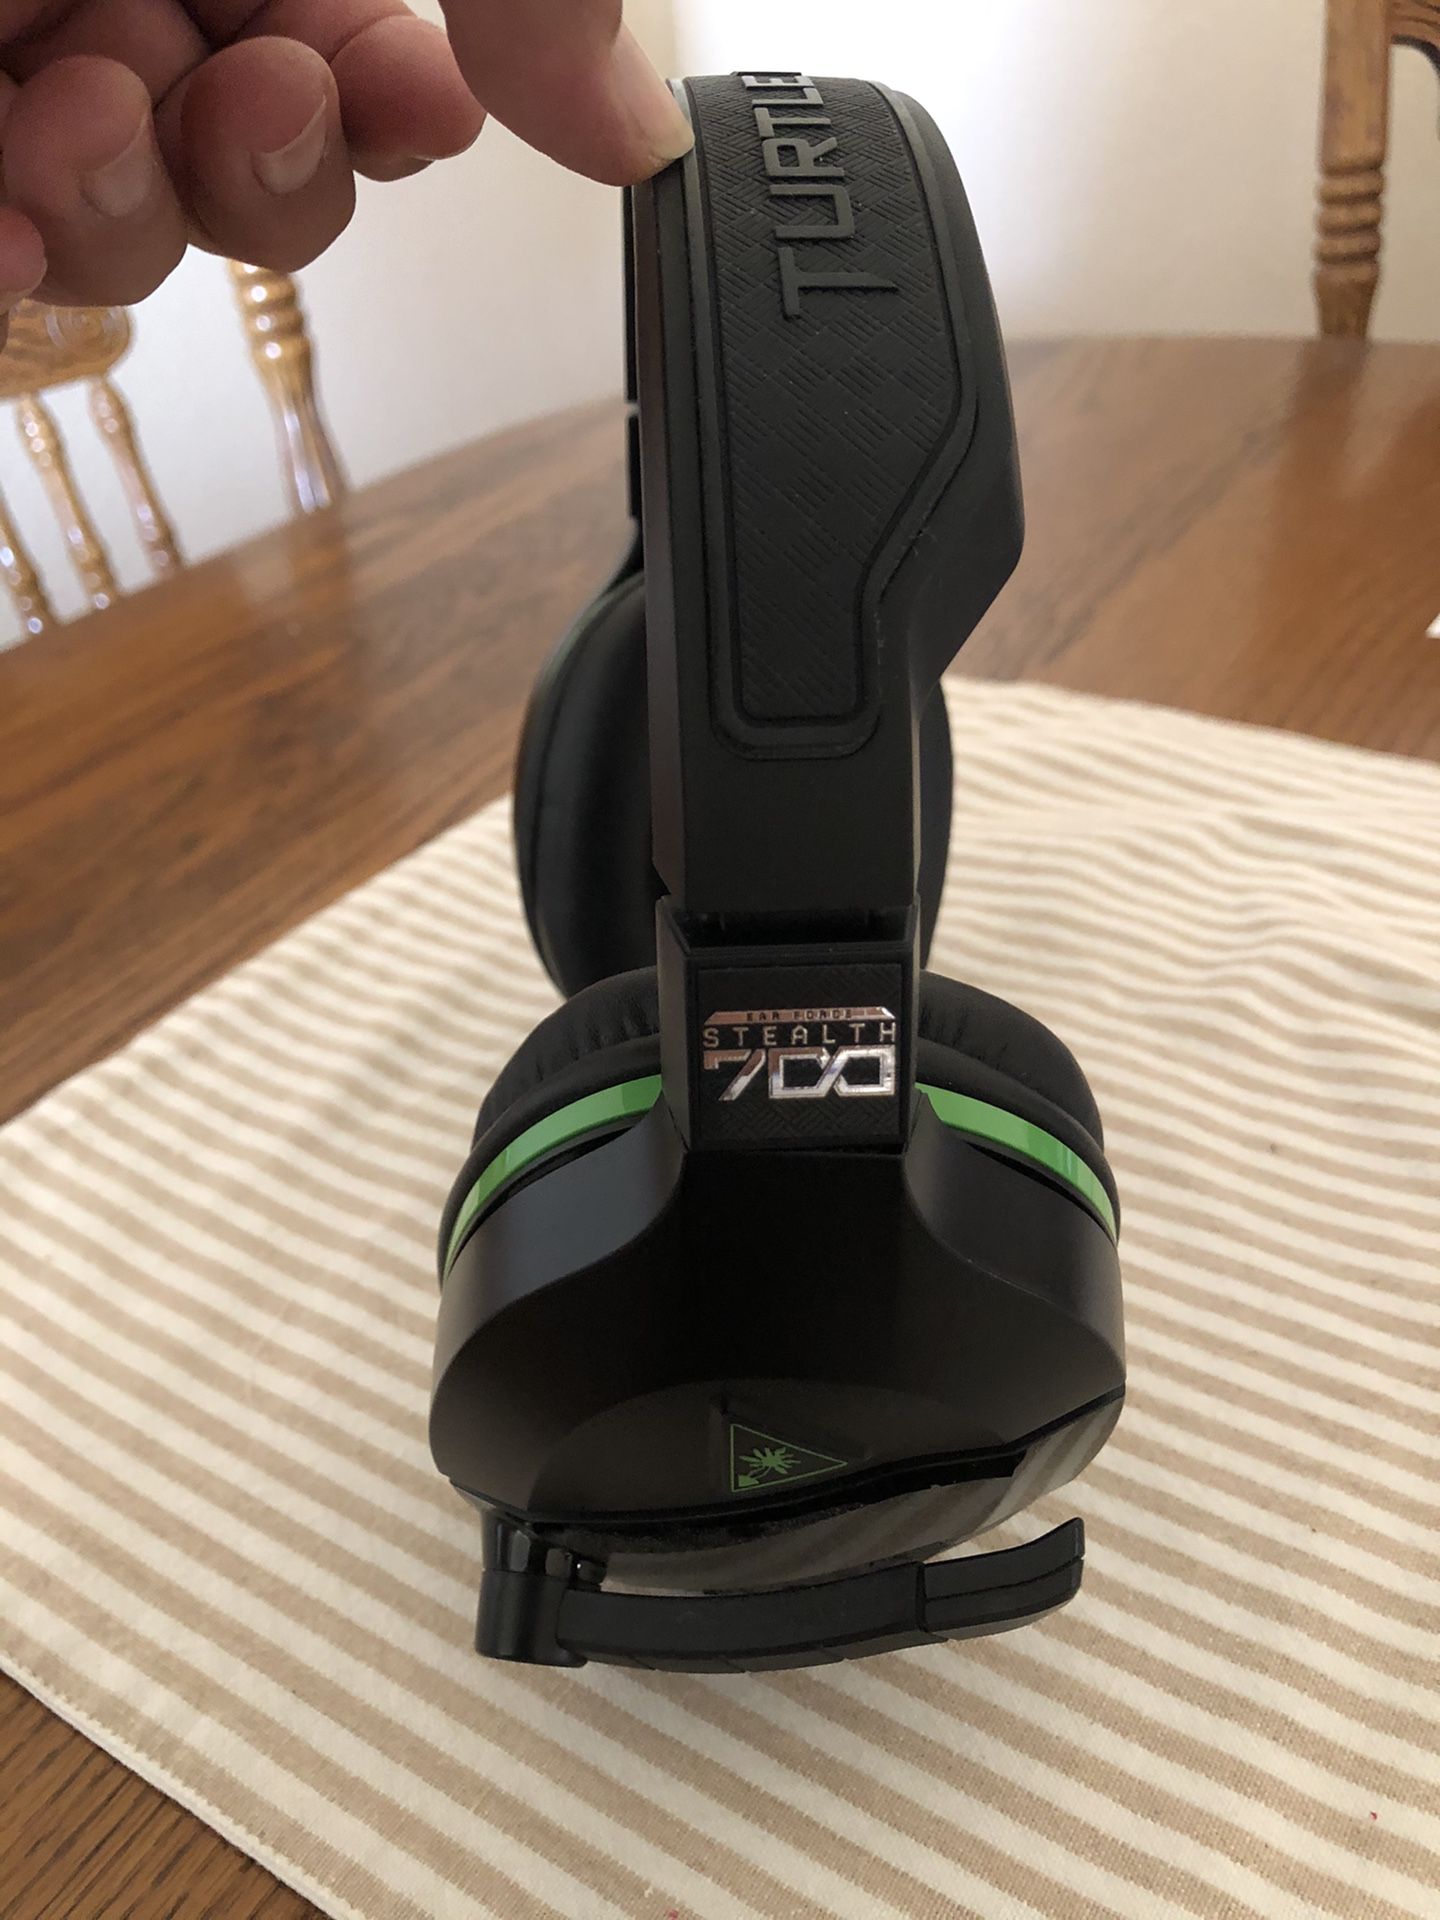 TURTLE BEACH STEALTH 700 WIRELESS GAMING HEADSET